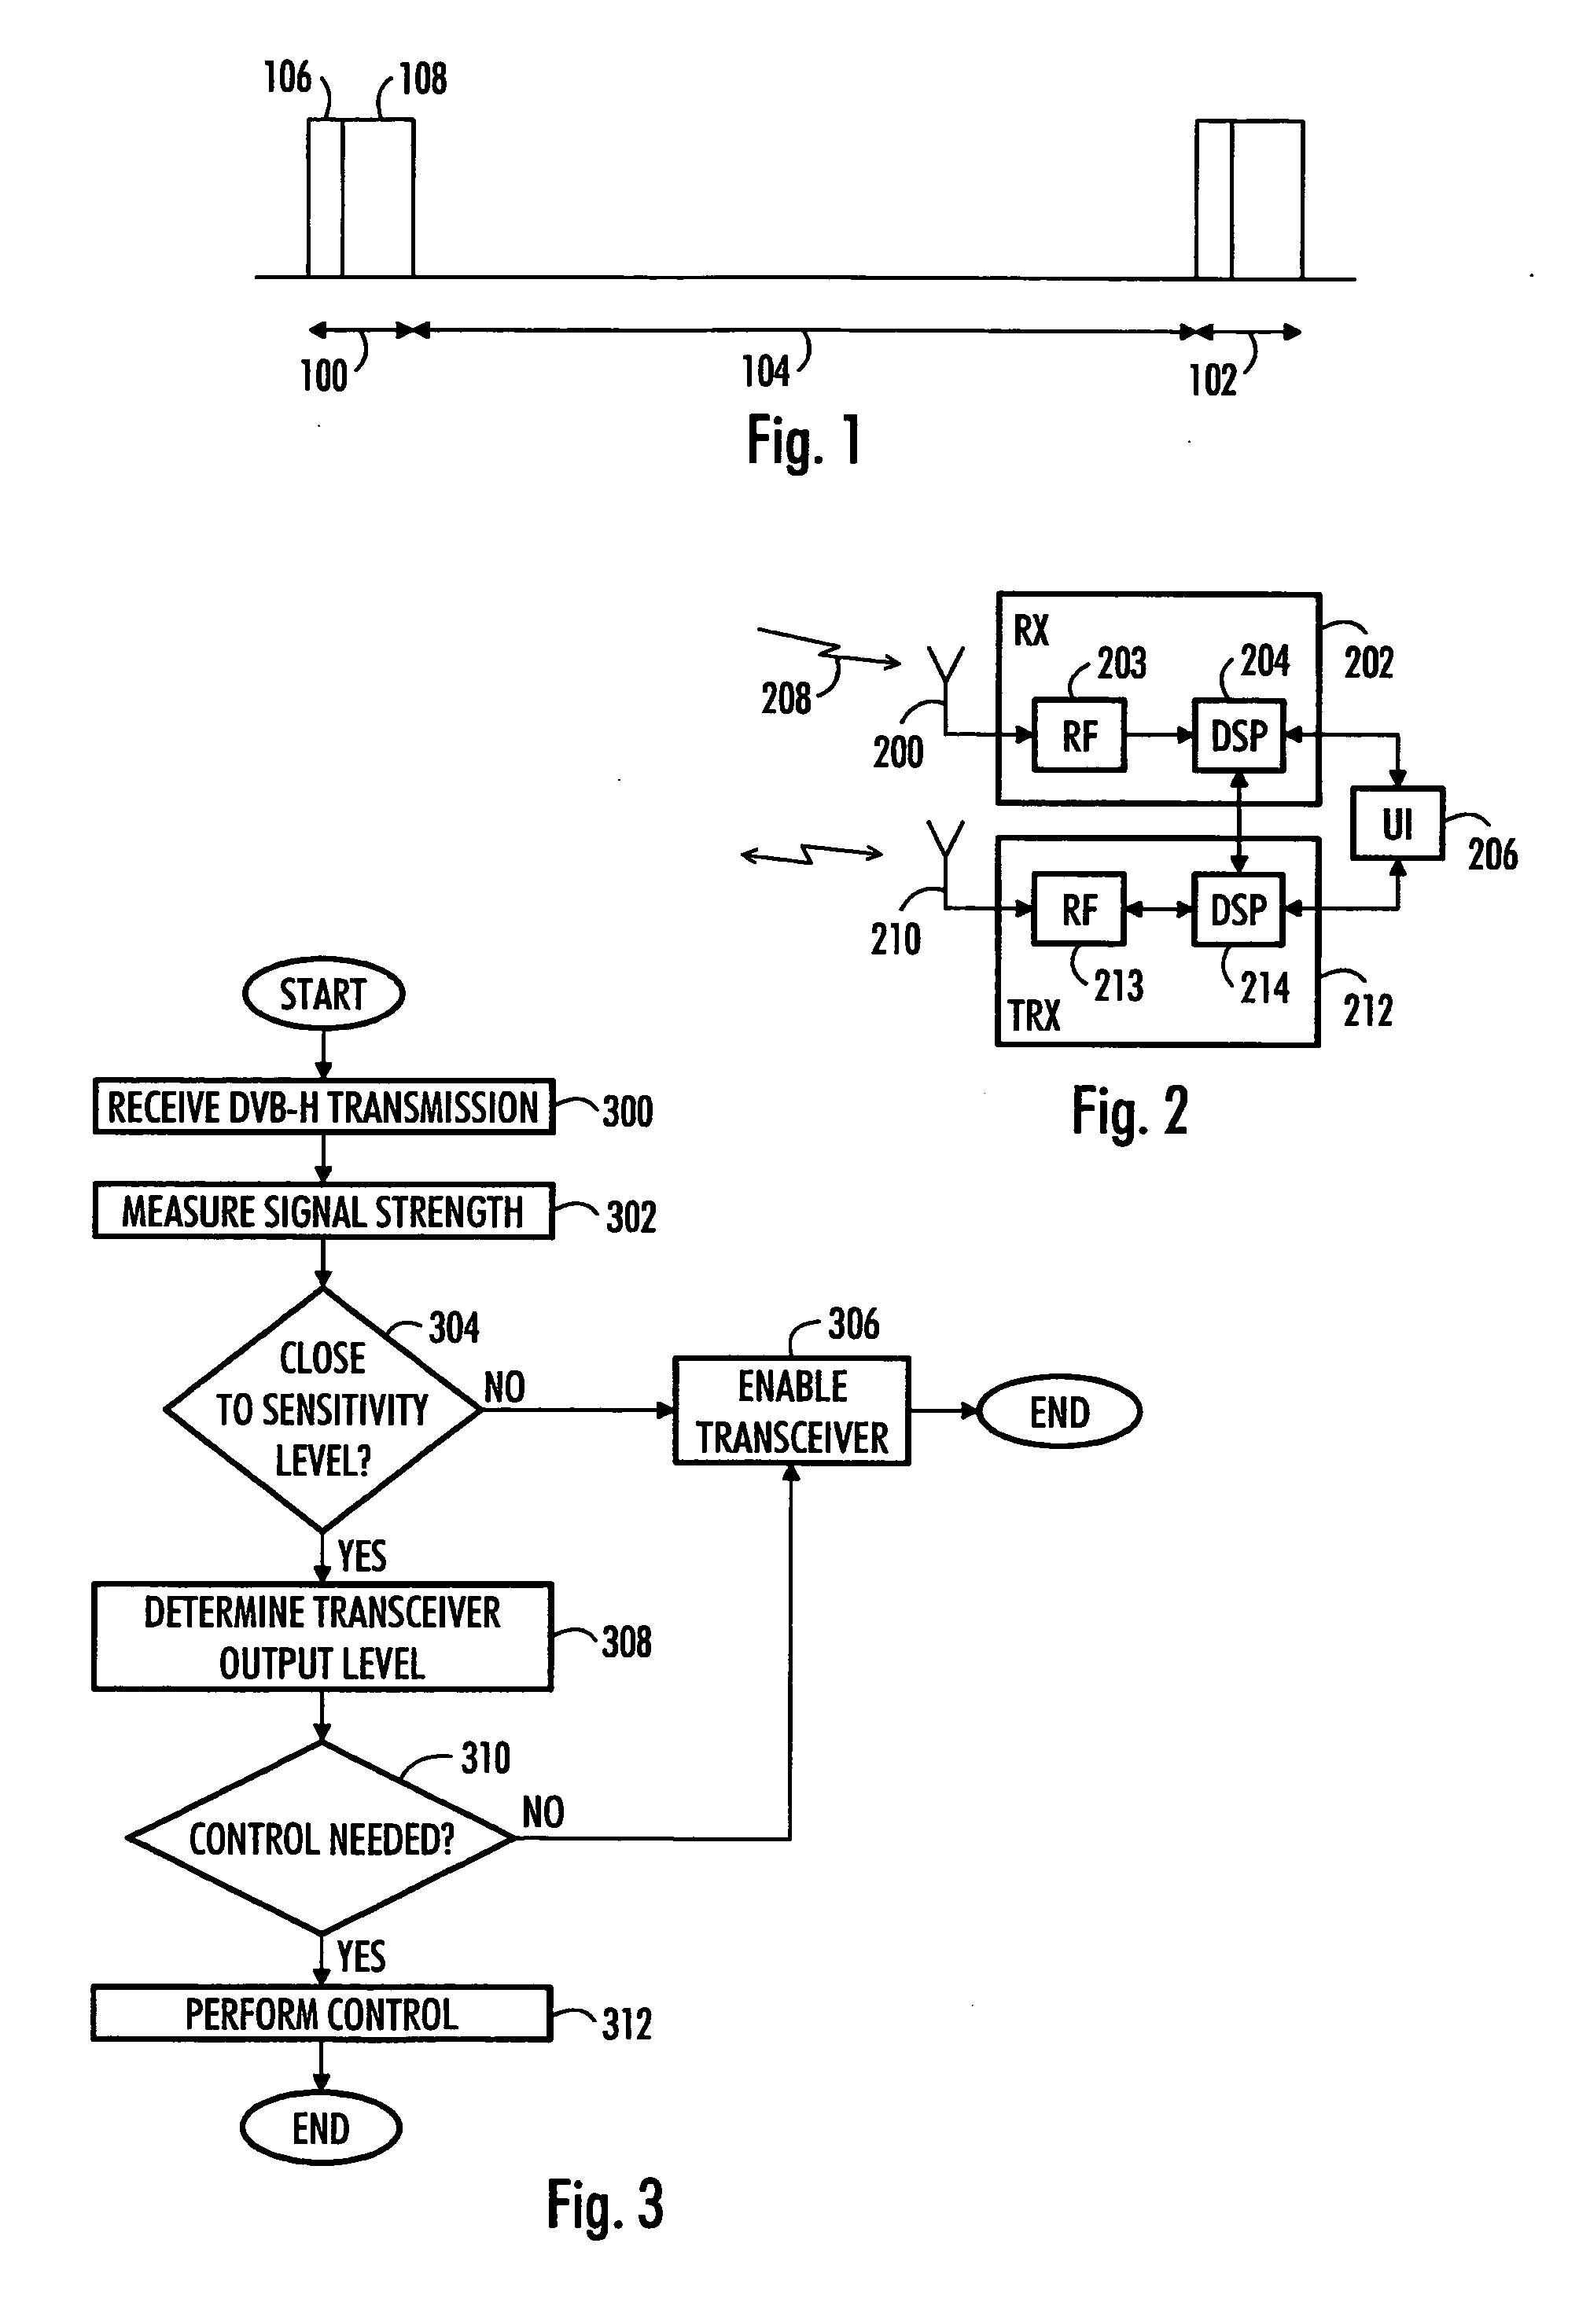 Operating multi-service receiver in non-interfering manner